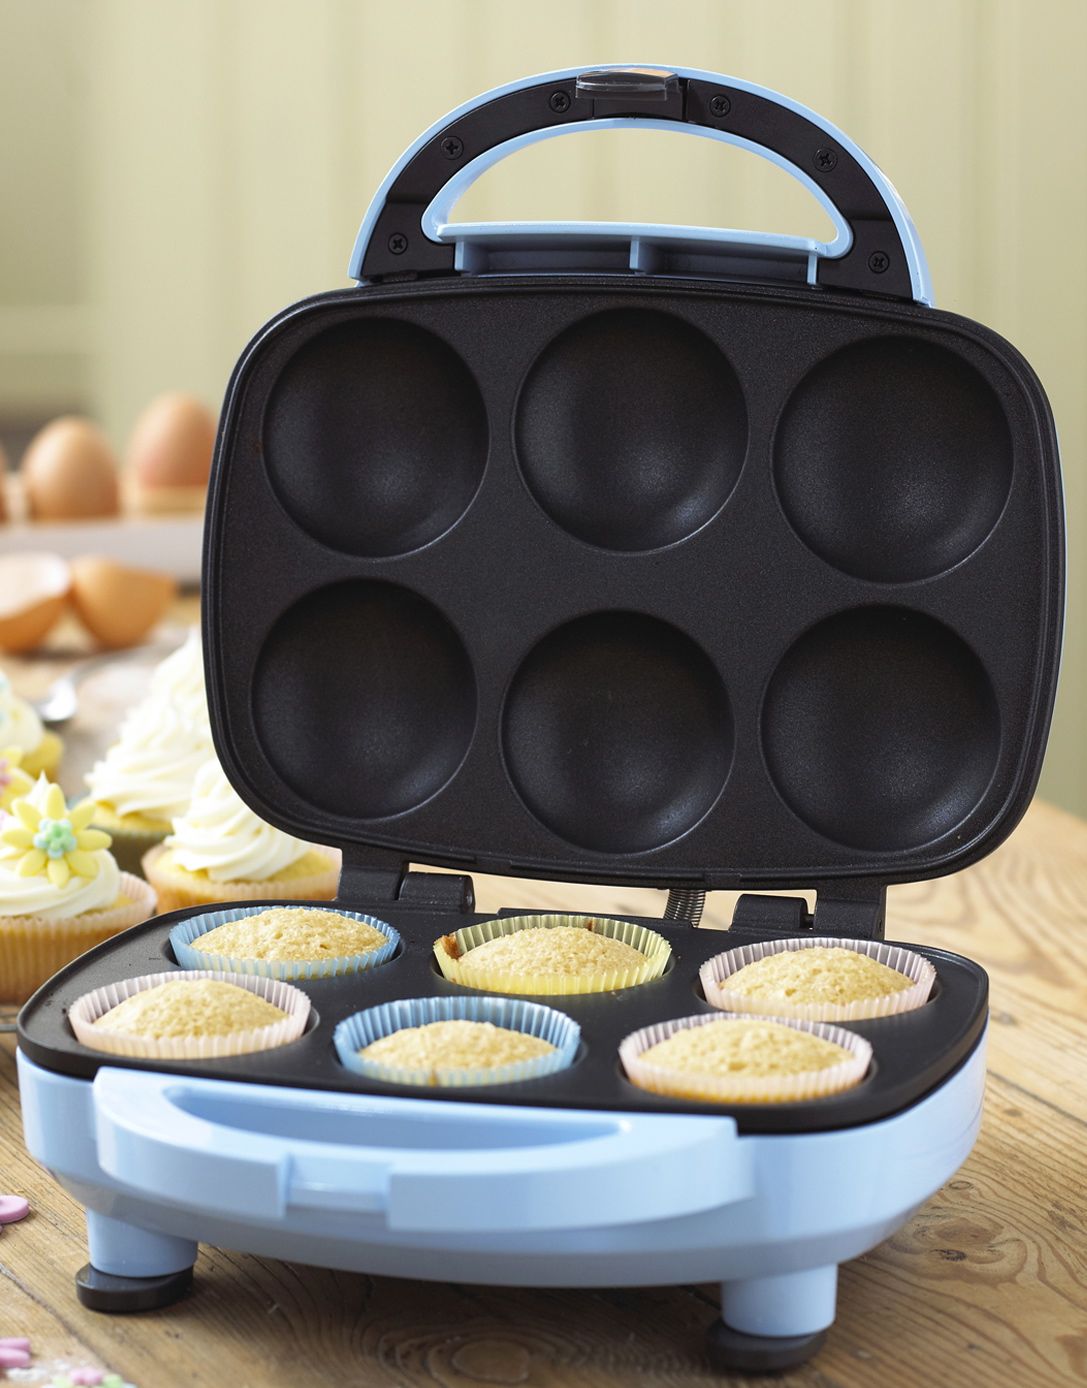 Electric cupcake and muffin maker - Rutos